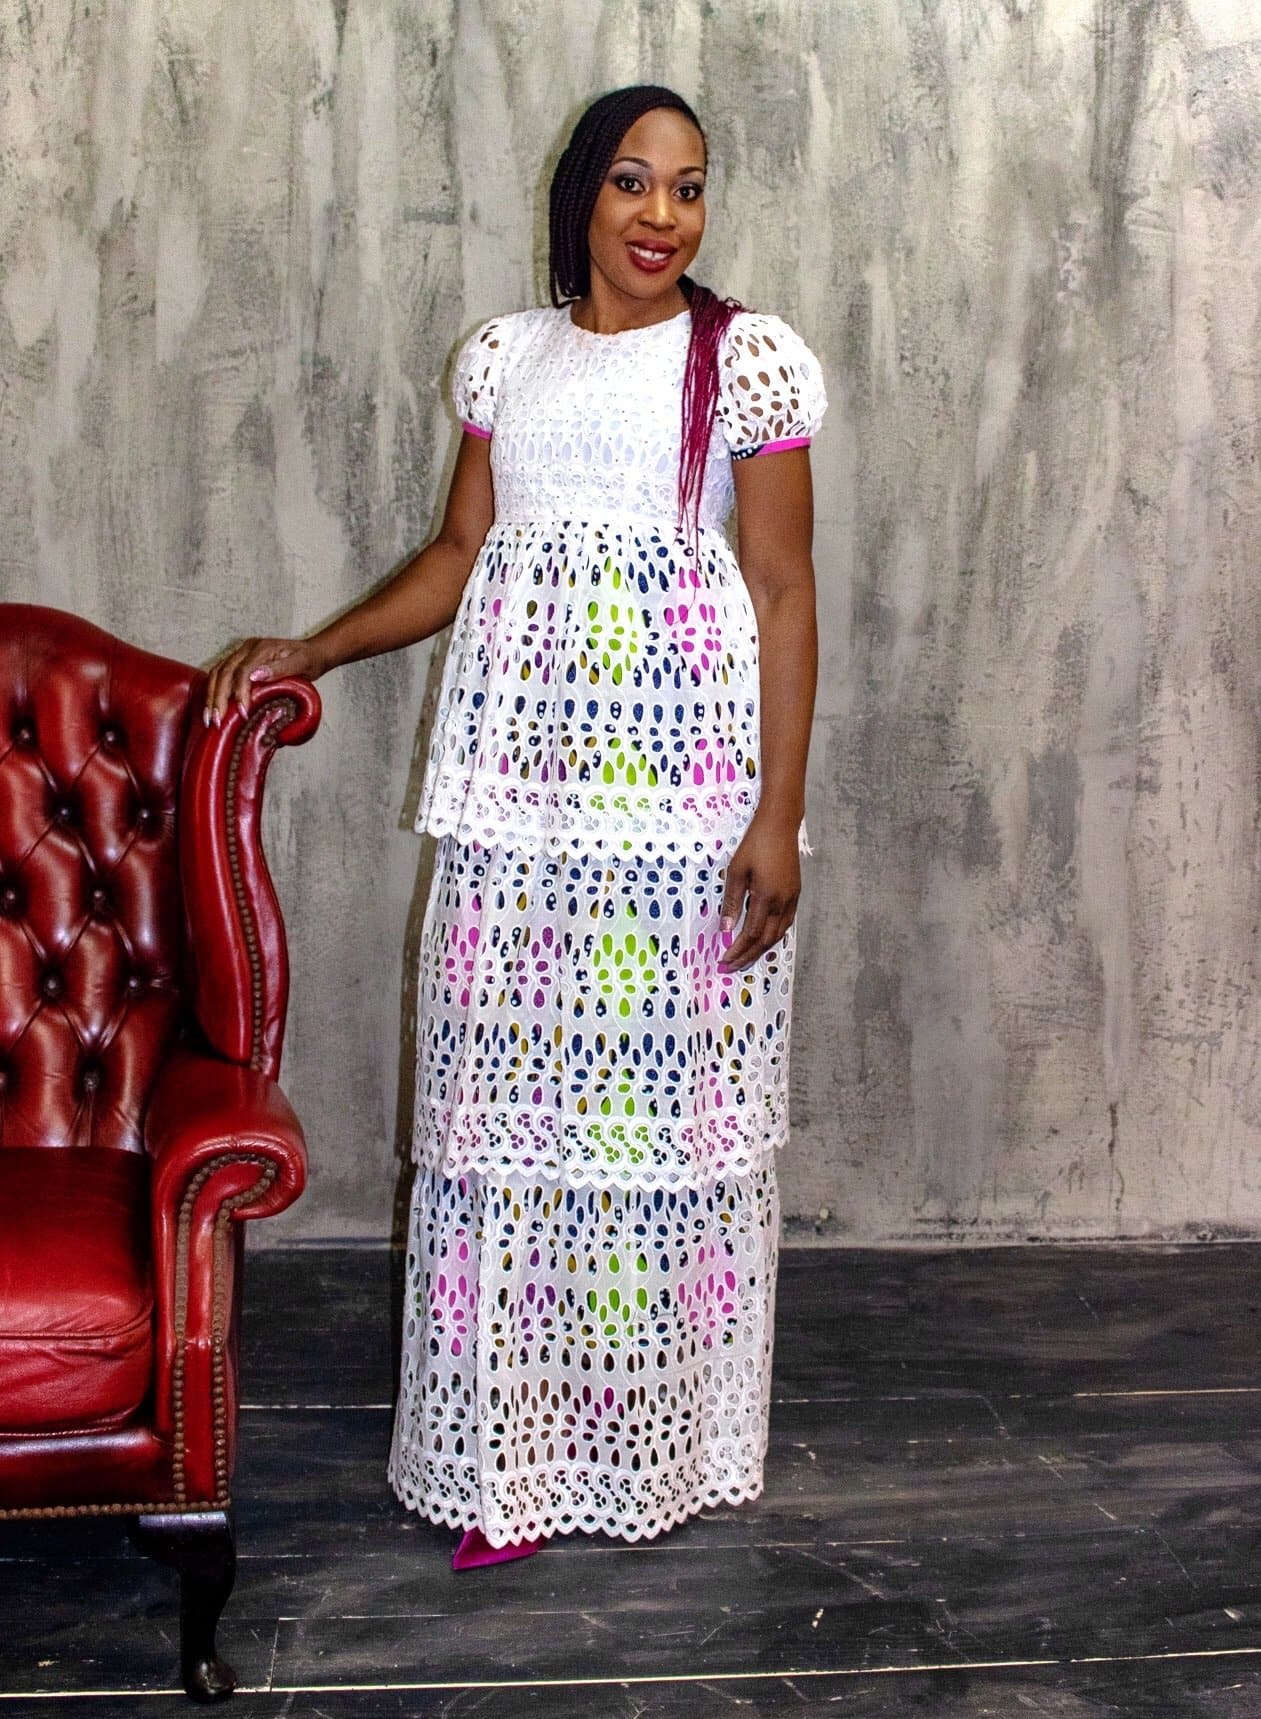 Embellished 3 Tier White Lace Maxi Dress with African Print Lining - African Clothing from CUMO LONDON